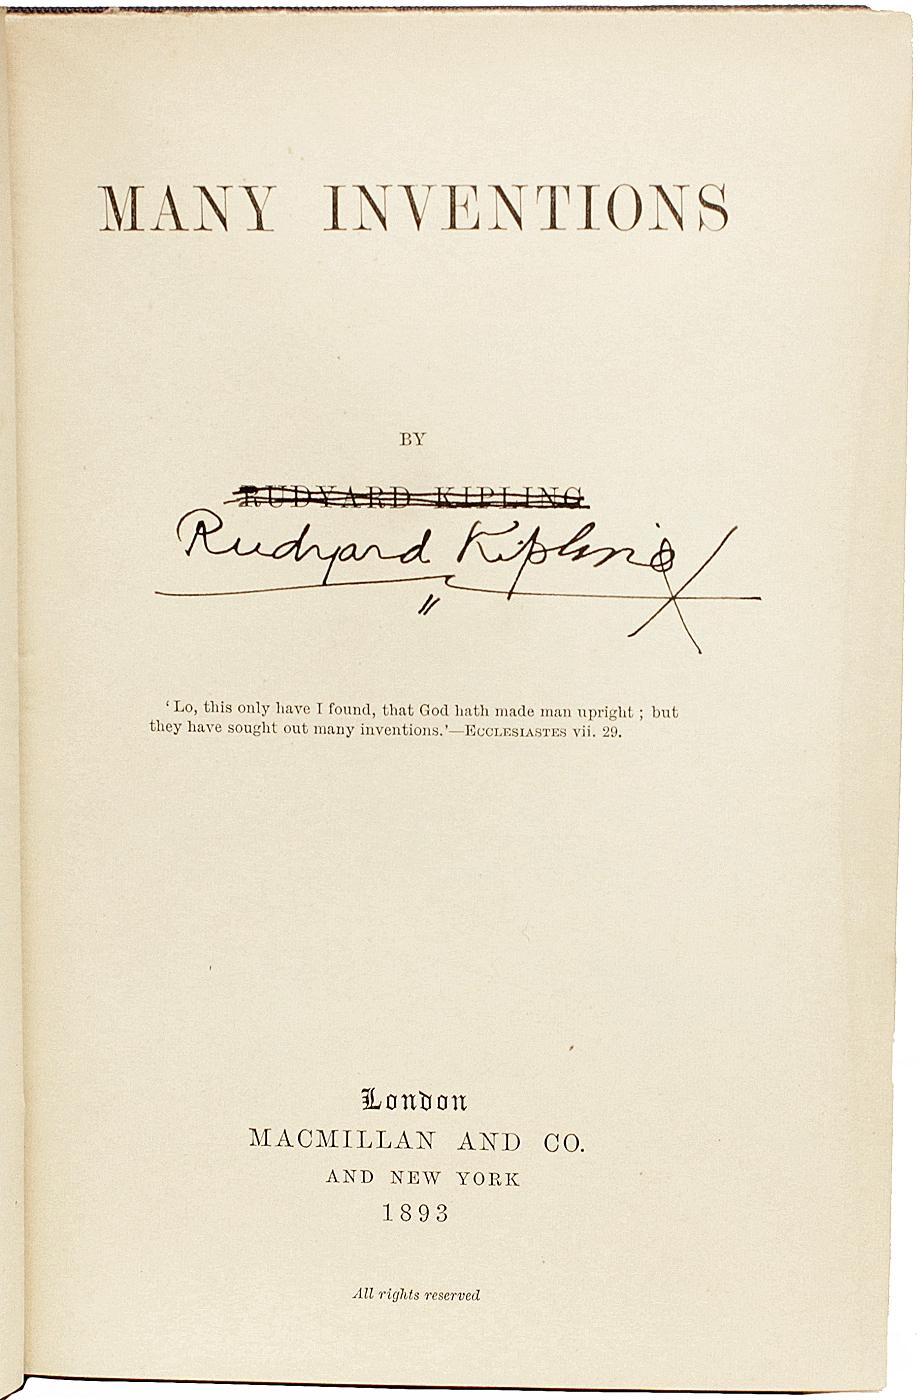 AUTHOR: KIPLING, Rudyard. 

TITLE: Many Inventions.

PUBLISHER: London: Macmillan & Co., 1893.

DESCRIPTION: FIRST EDITION SIGNED. 1 vol., signed by Kipling on the title-page under his name, bound in the publisher's original gilt stamped blue cloth,